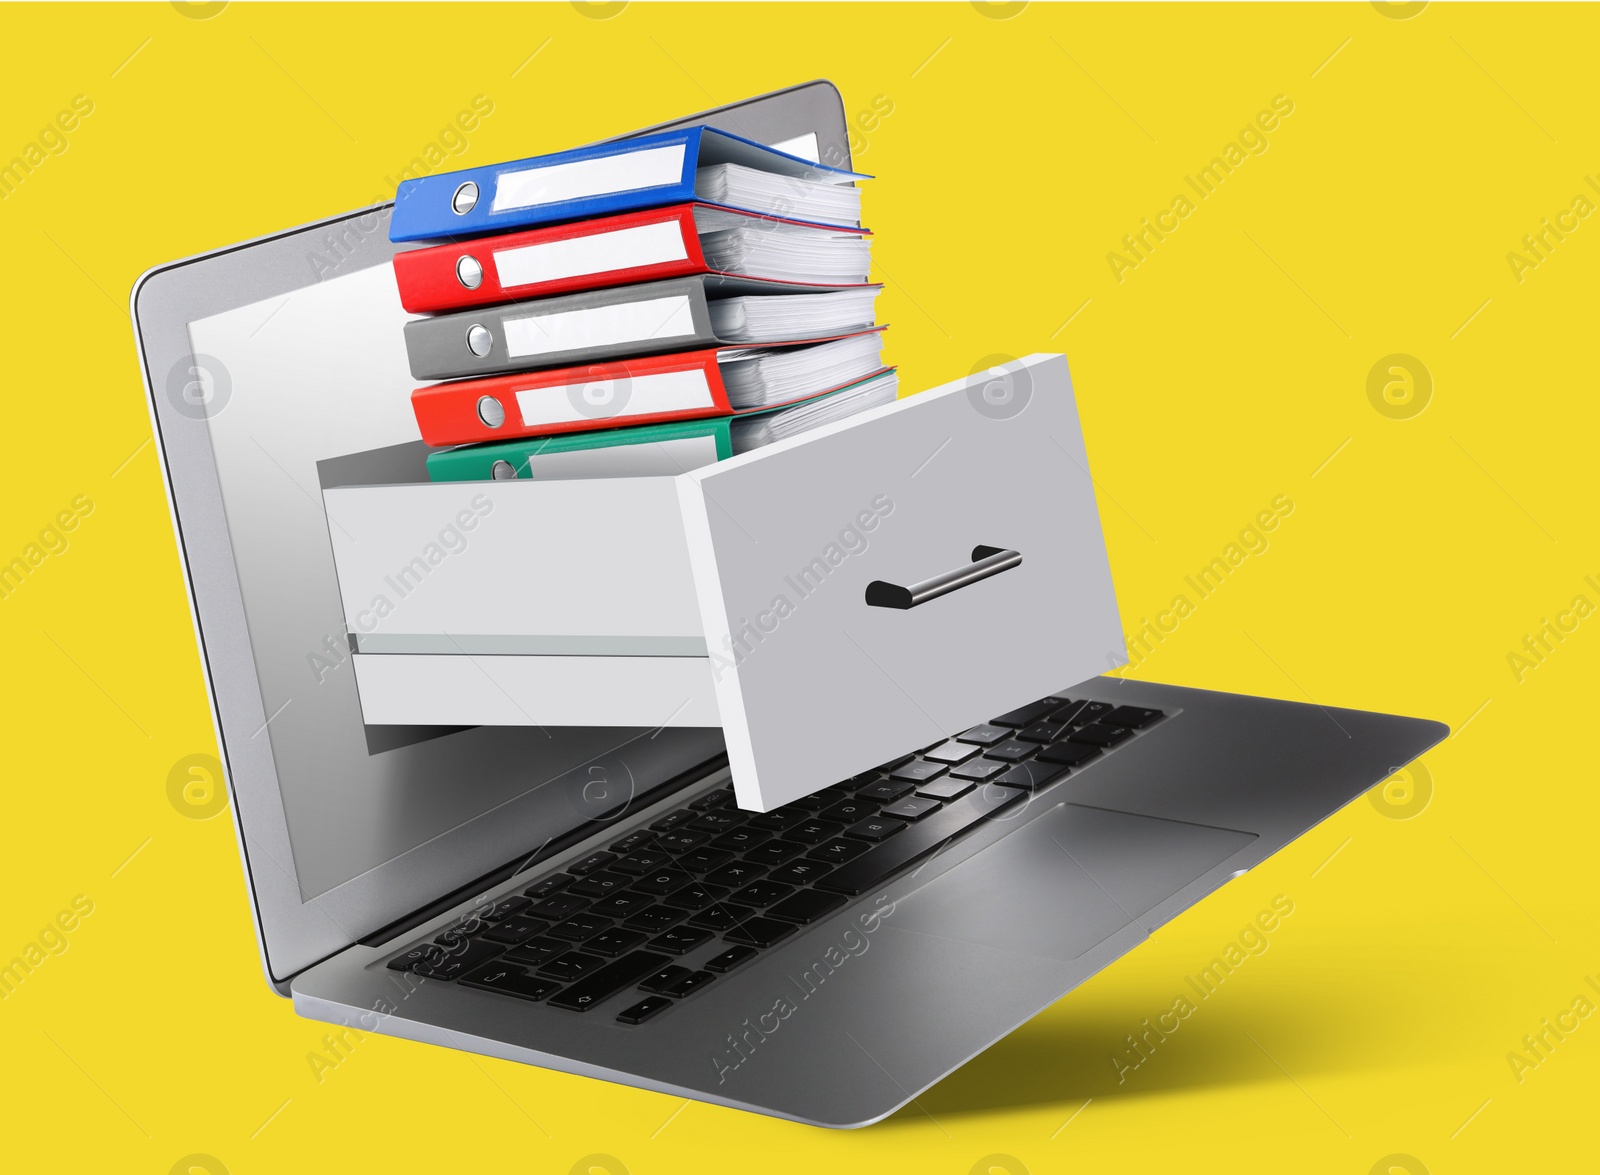 Image of Digital archive. Drawer with stacked folders sticking out of laptop screen on yellow background